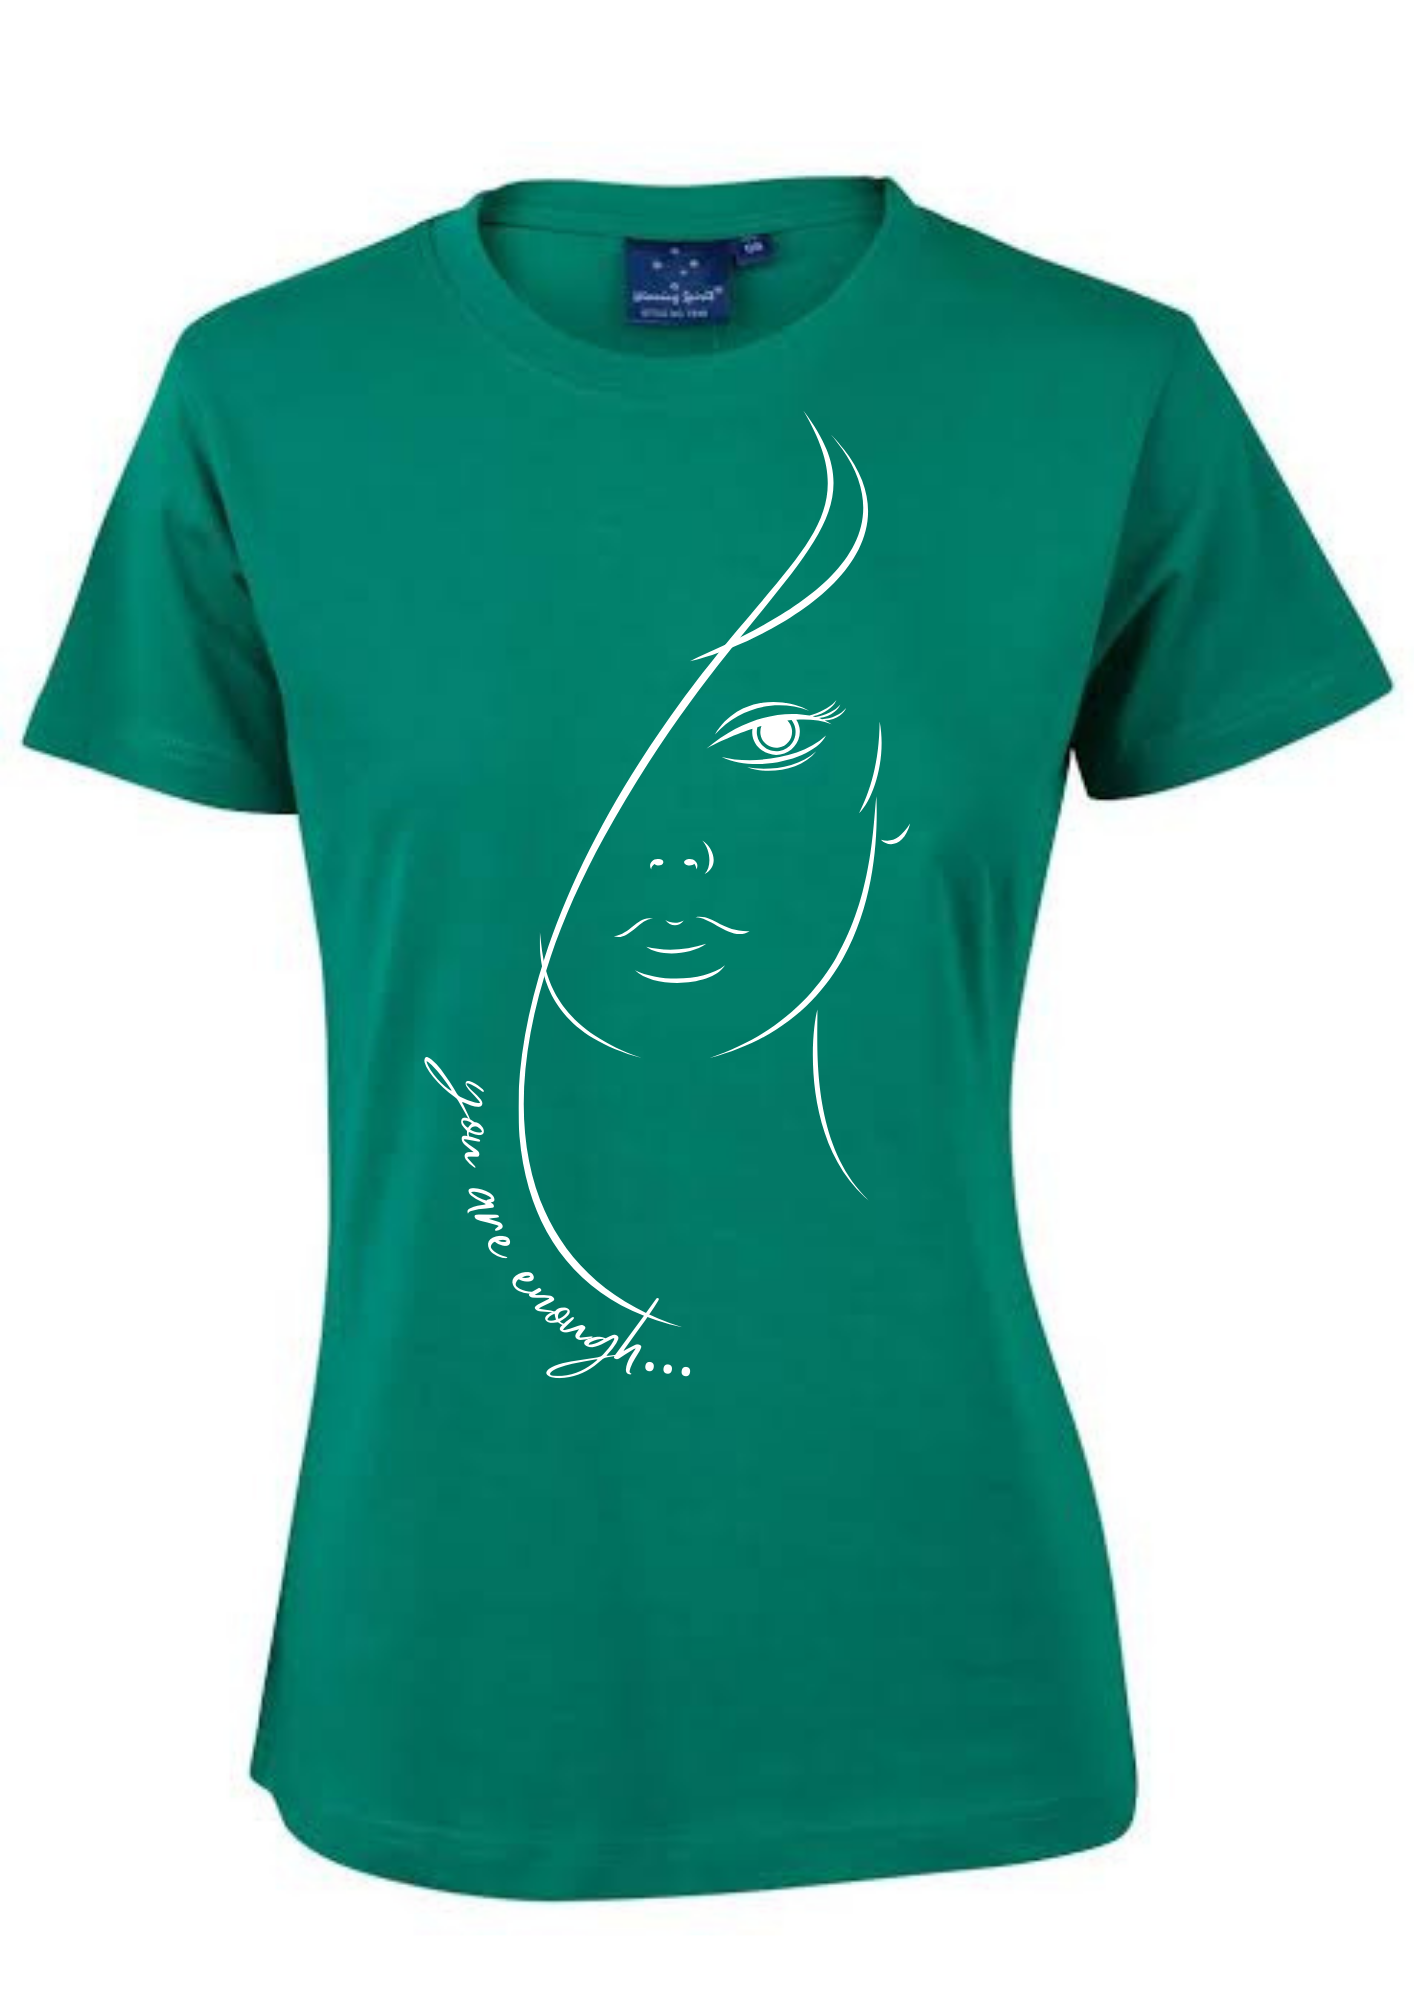  
Sometimes we get so bogged down in life that we lose ourselves a little. No matter what stage of life you are in, please know, You Are Enough 
This tee is part of  - You Are Enough Tee - Collard Greens x Ciao Bella Dresses